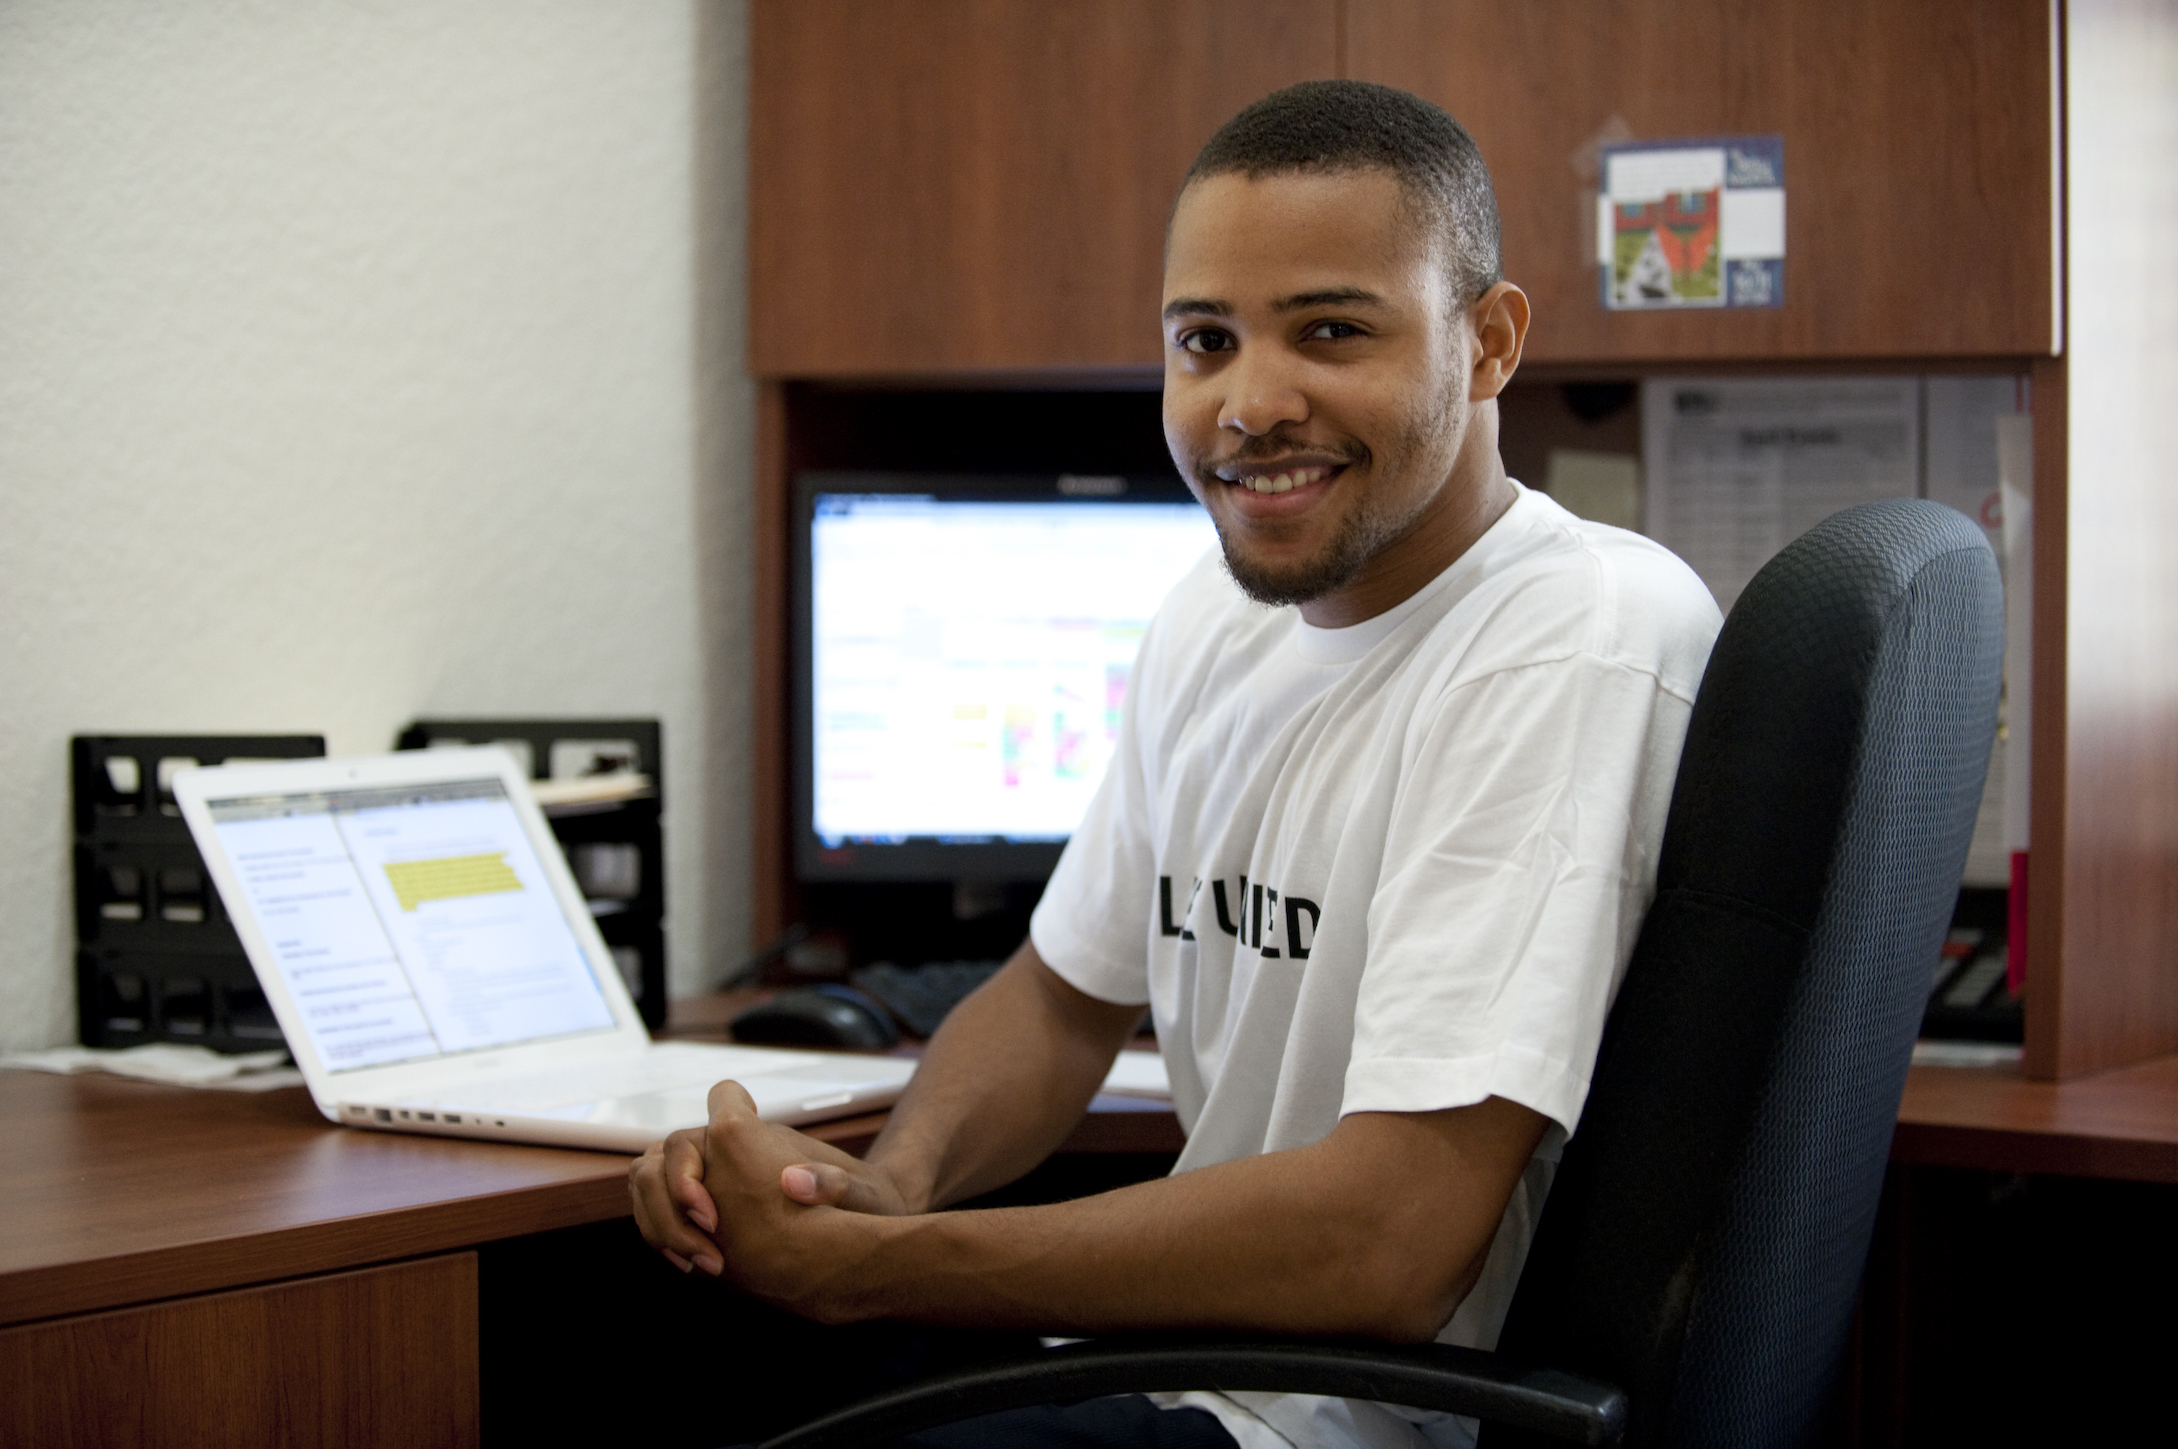 Smiling young Black man sitting next to an open laptop